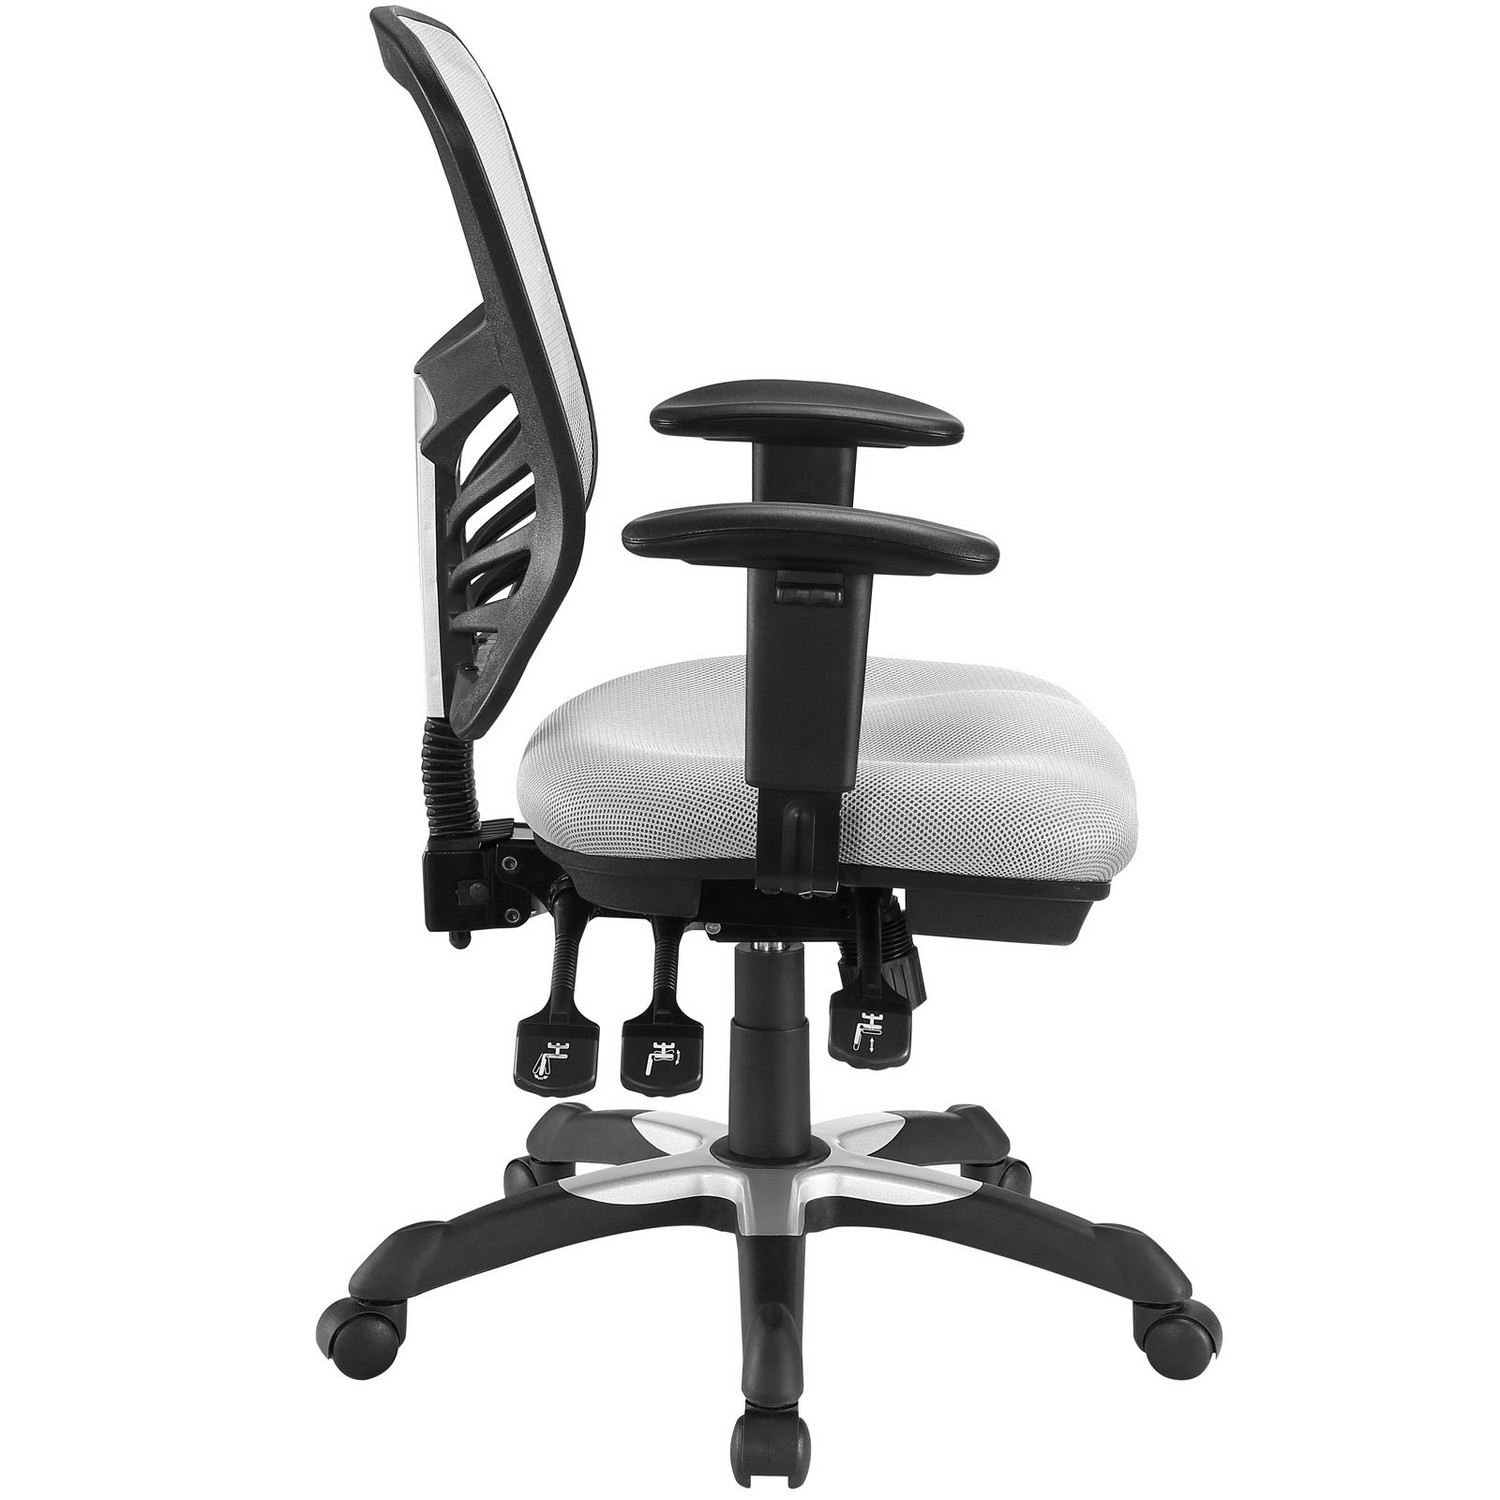 Modway Articulate Mesh Office Chair - Gray MW-EEI-757-GRY at Homelement.com